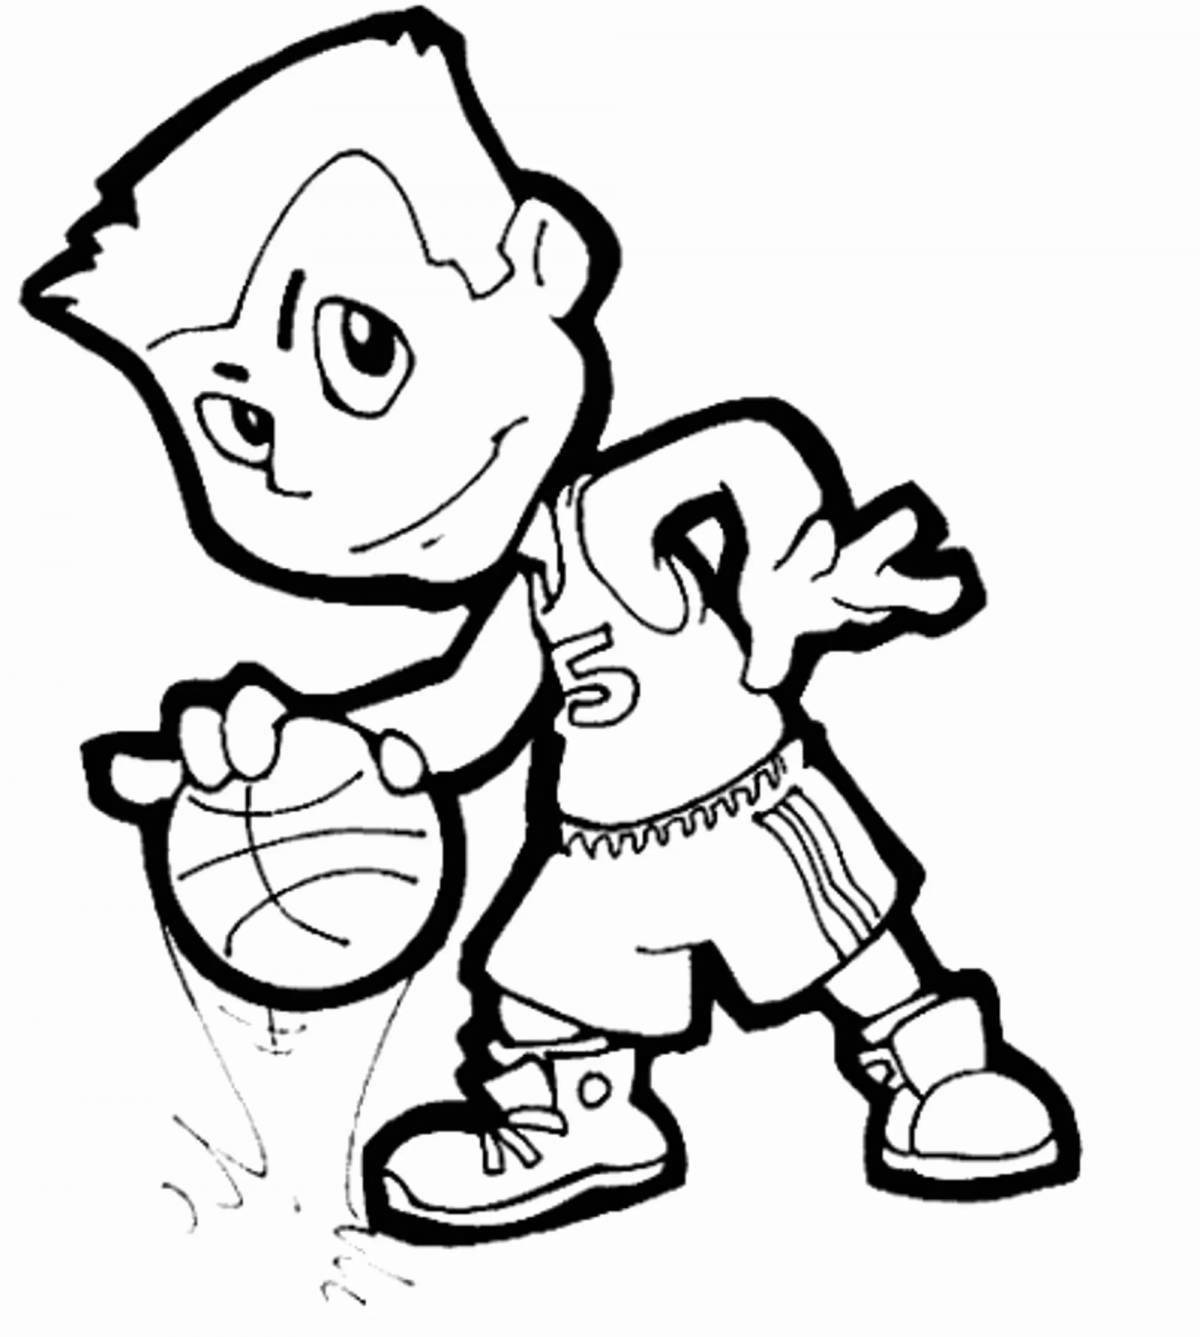 Dynamic athletes coloring pages for kids